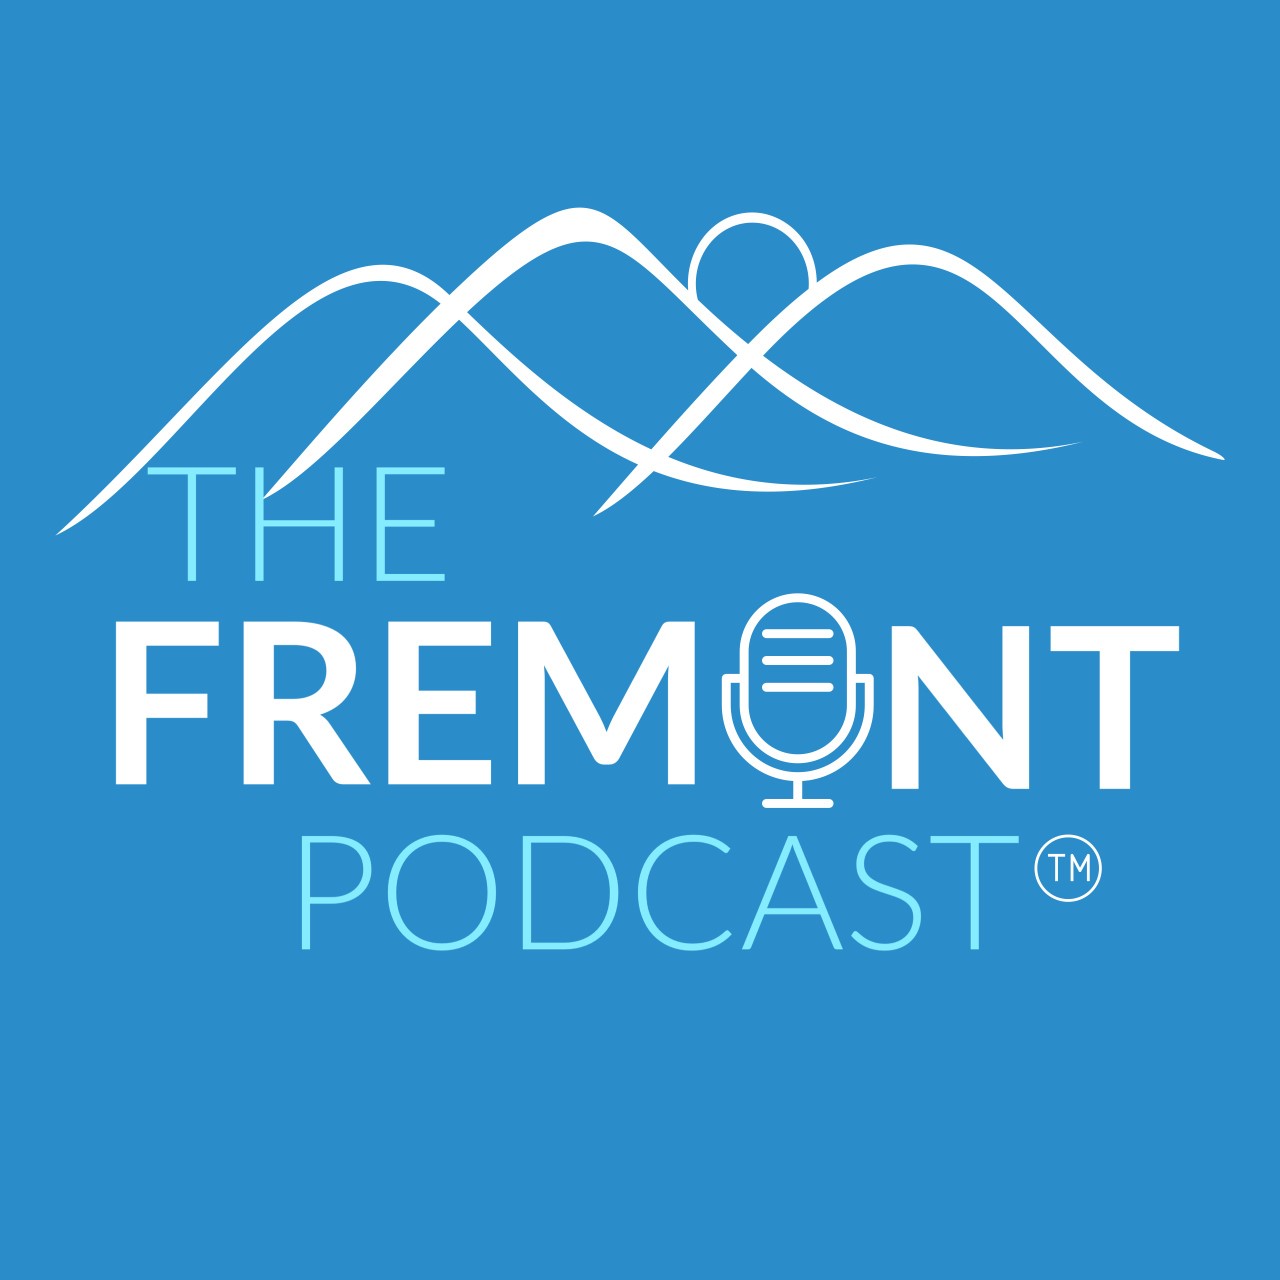 The Fremont Podcast